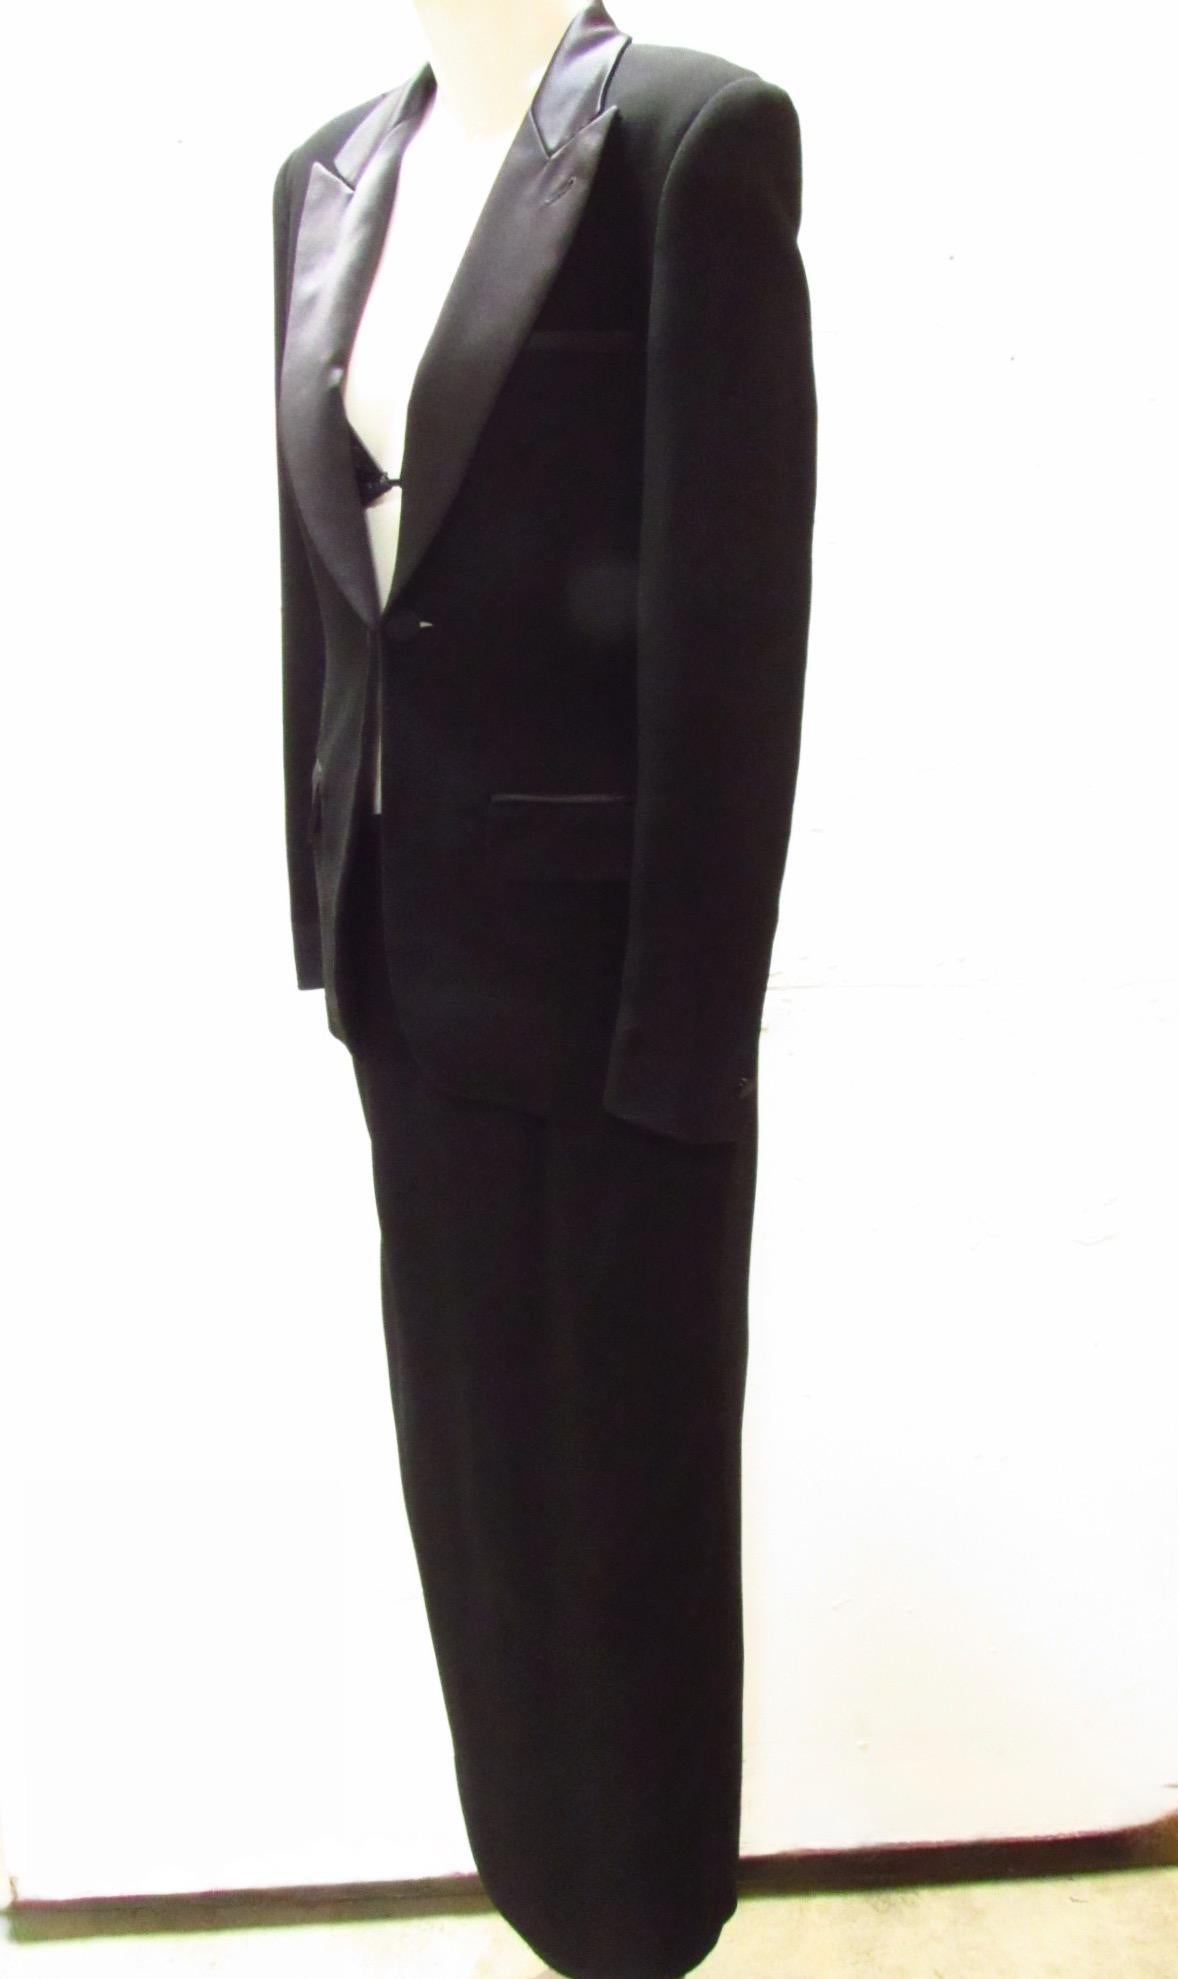 Vintage Jean Paul Gaultier black tuxedo-style dress. The skirt portion is secured with a zipper and hook & eye closure. The elegant jacket features satin cuffs and collar and two front buttons, while the back zips up to the collar's hook and eye